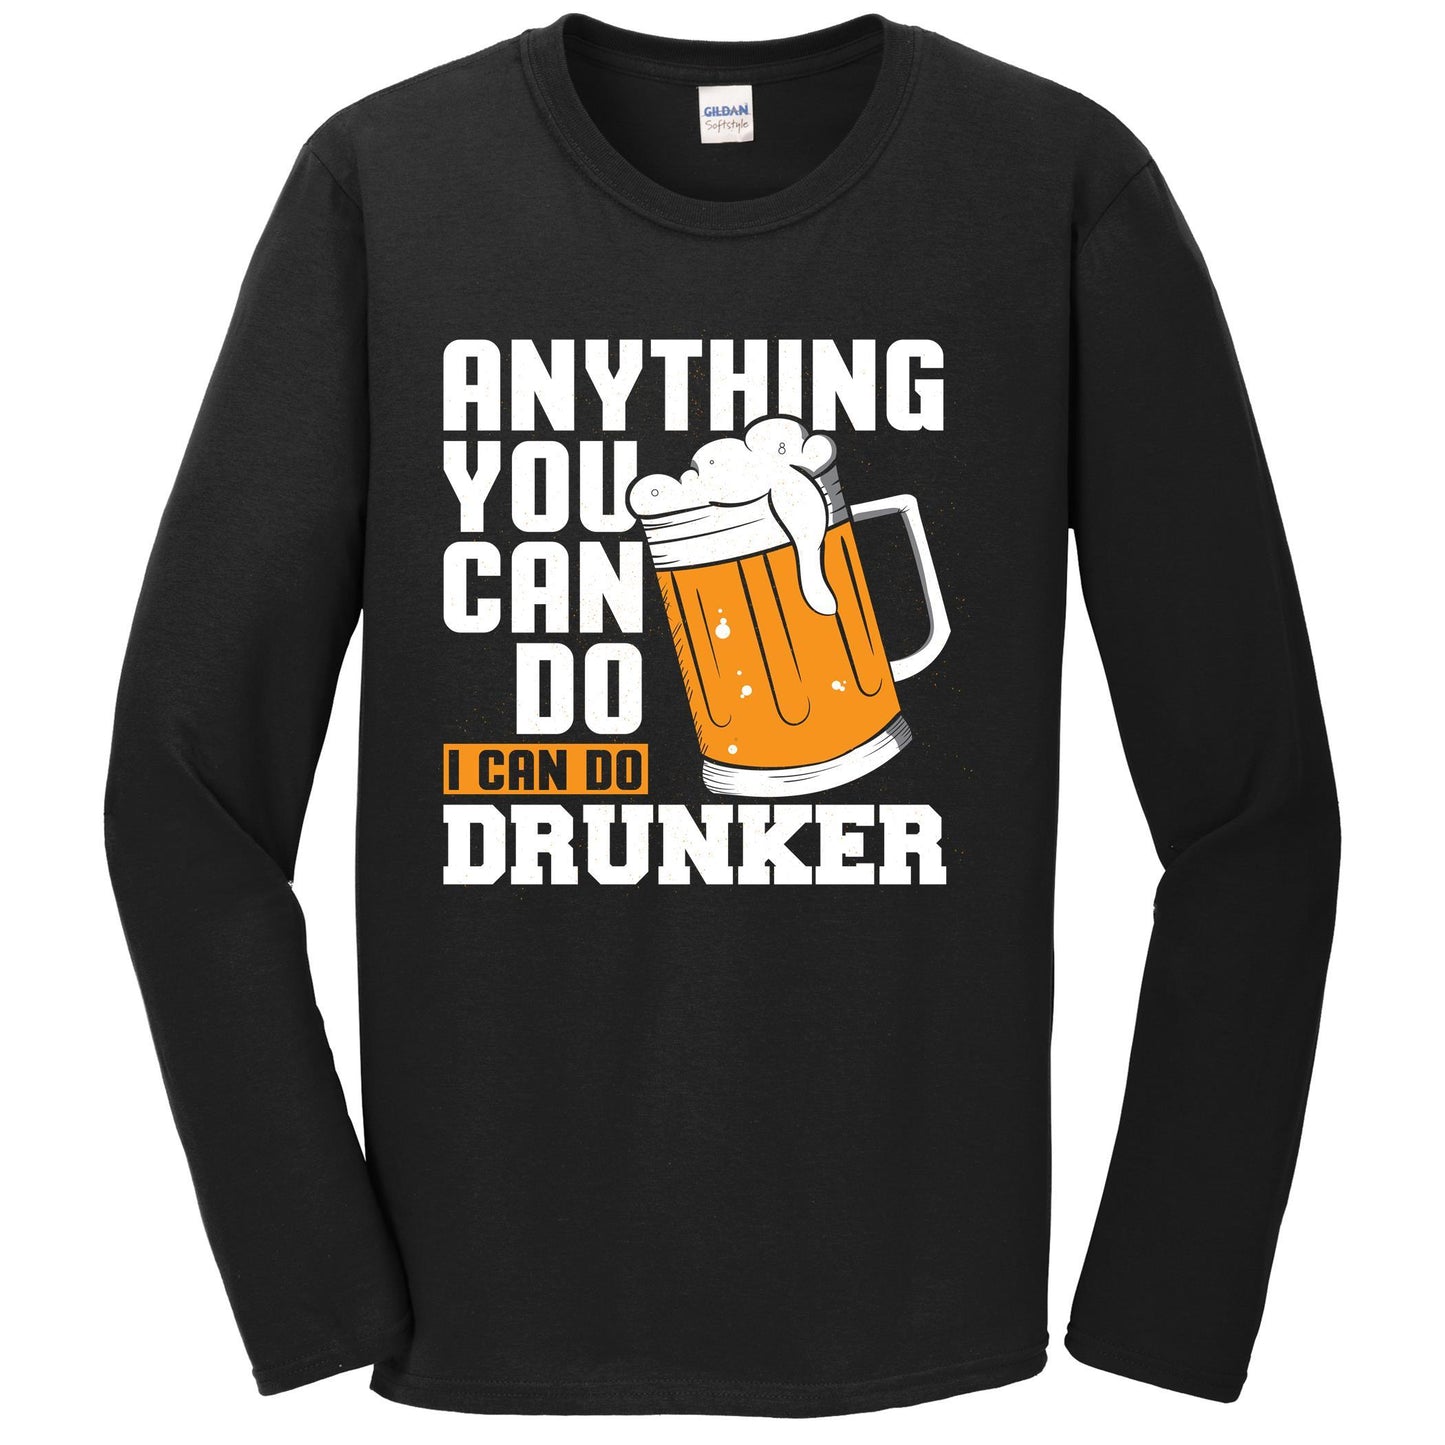 Anything You Can Do I Can Do Drunker Funny Drinking Long Sleeve Shirt